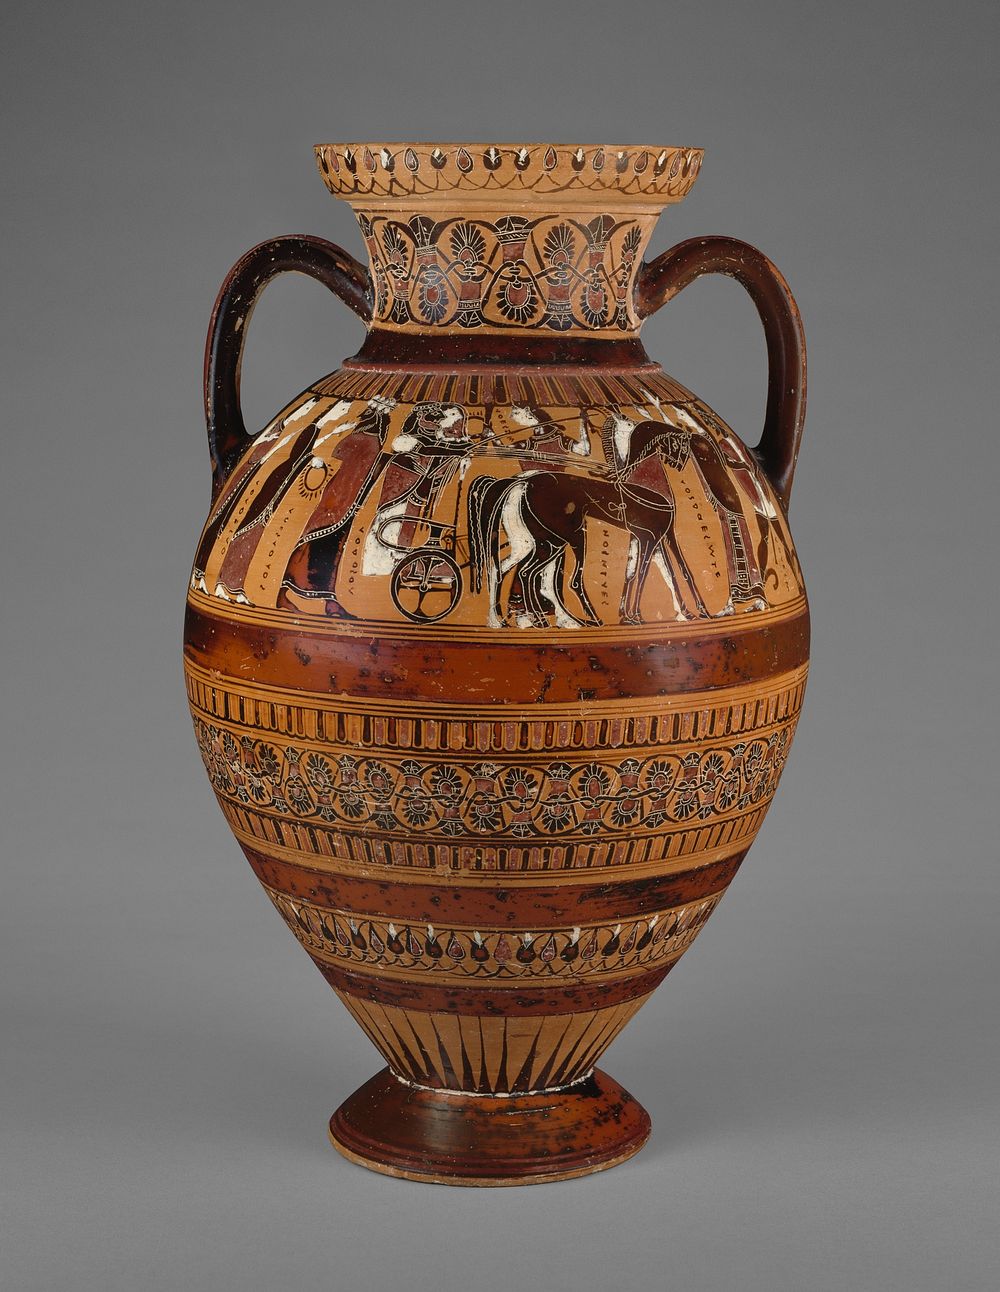 Attic Black-figure "Tyrrhenian" Amphora with (A) a Wedding Procession and (B) a Combat Scene by Pointed Nose Painter